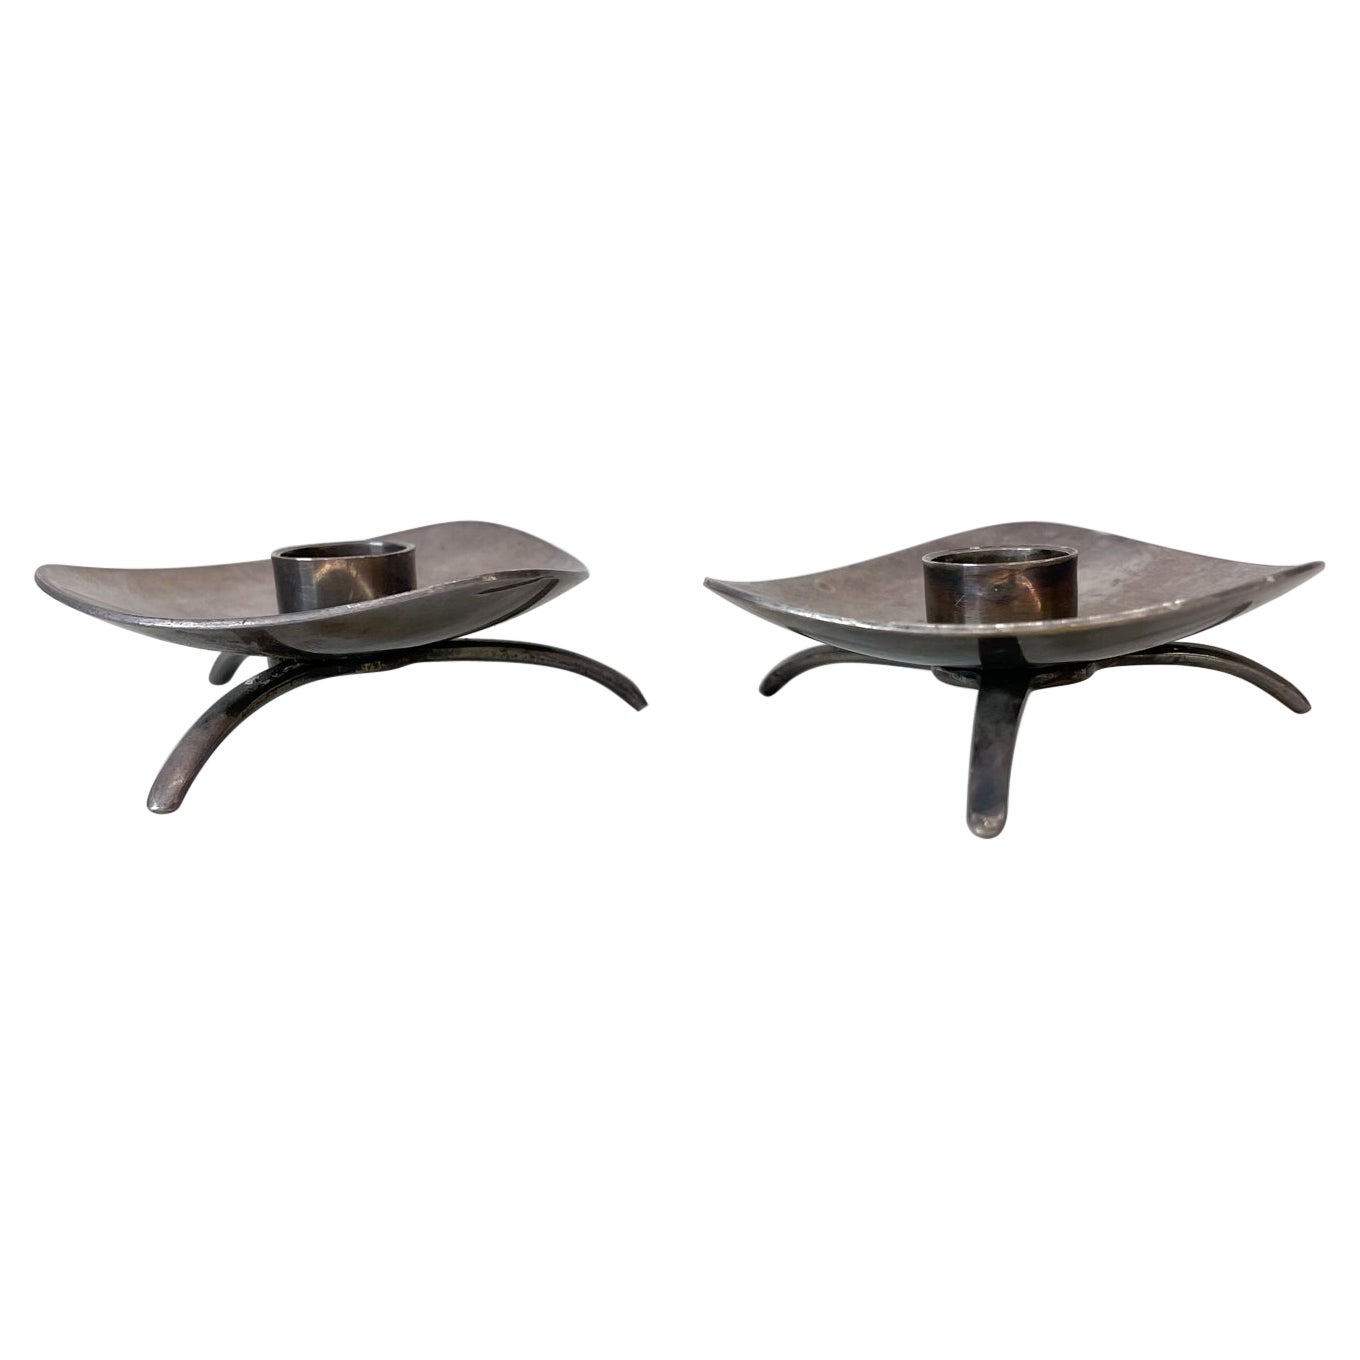 Pair Modernist Silver Plated Candle Holders by Carl Cohr ATLA Denmark, 1960s